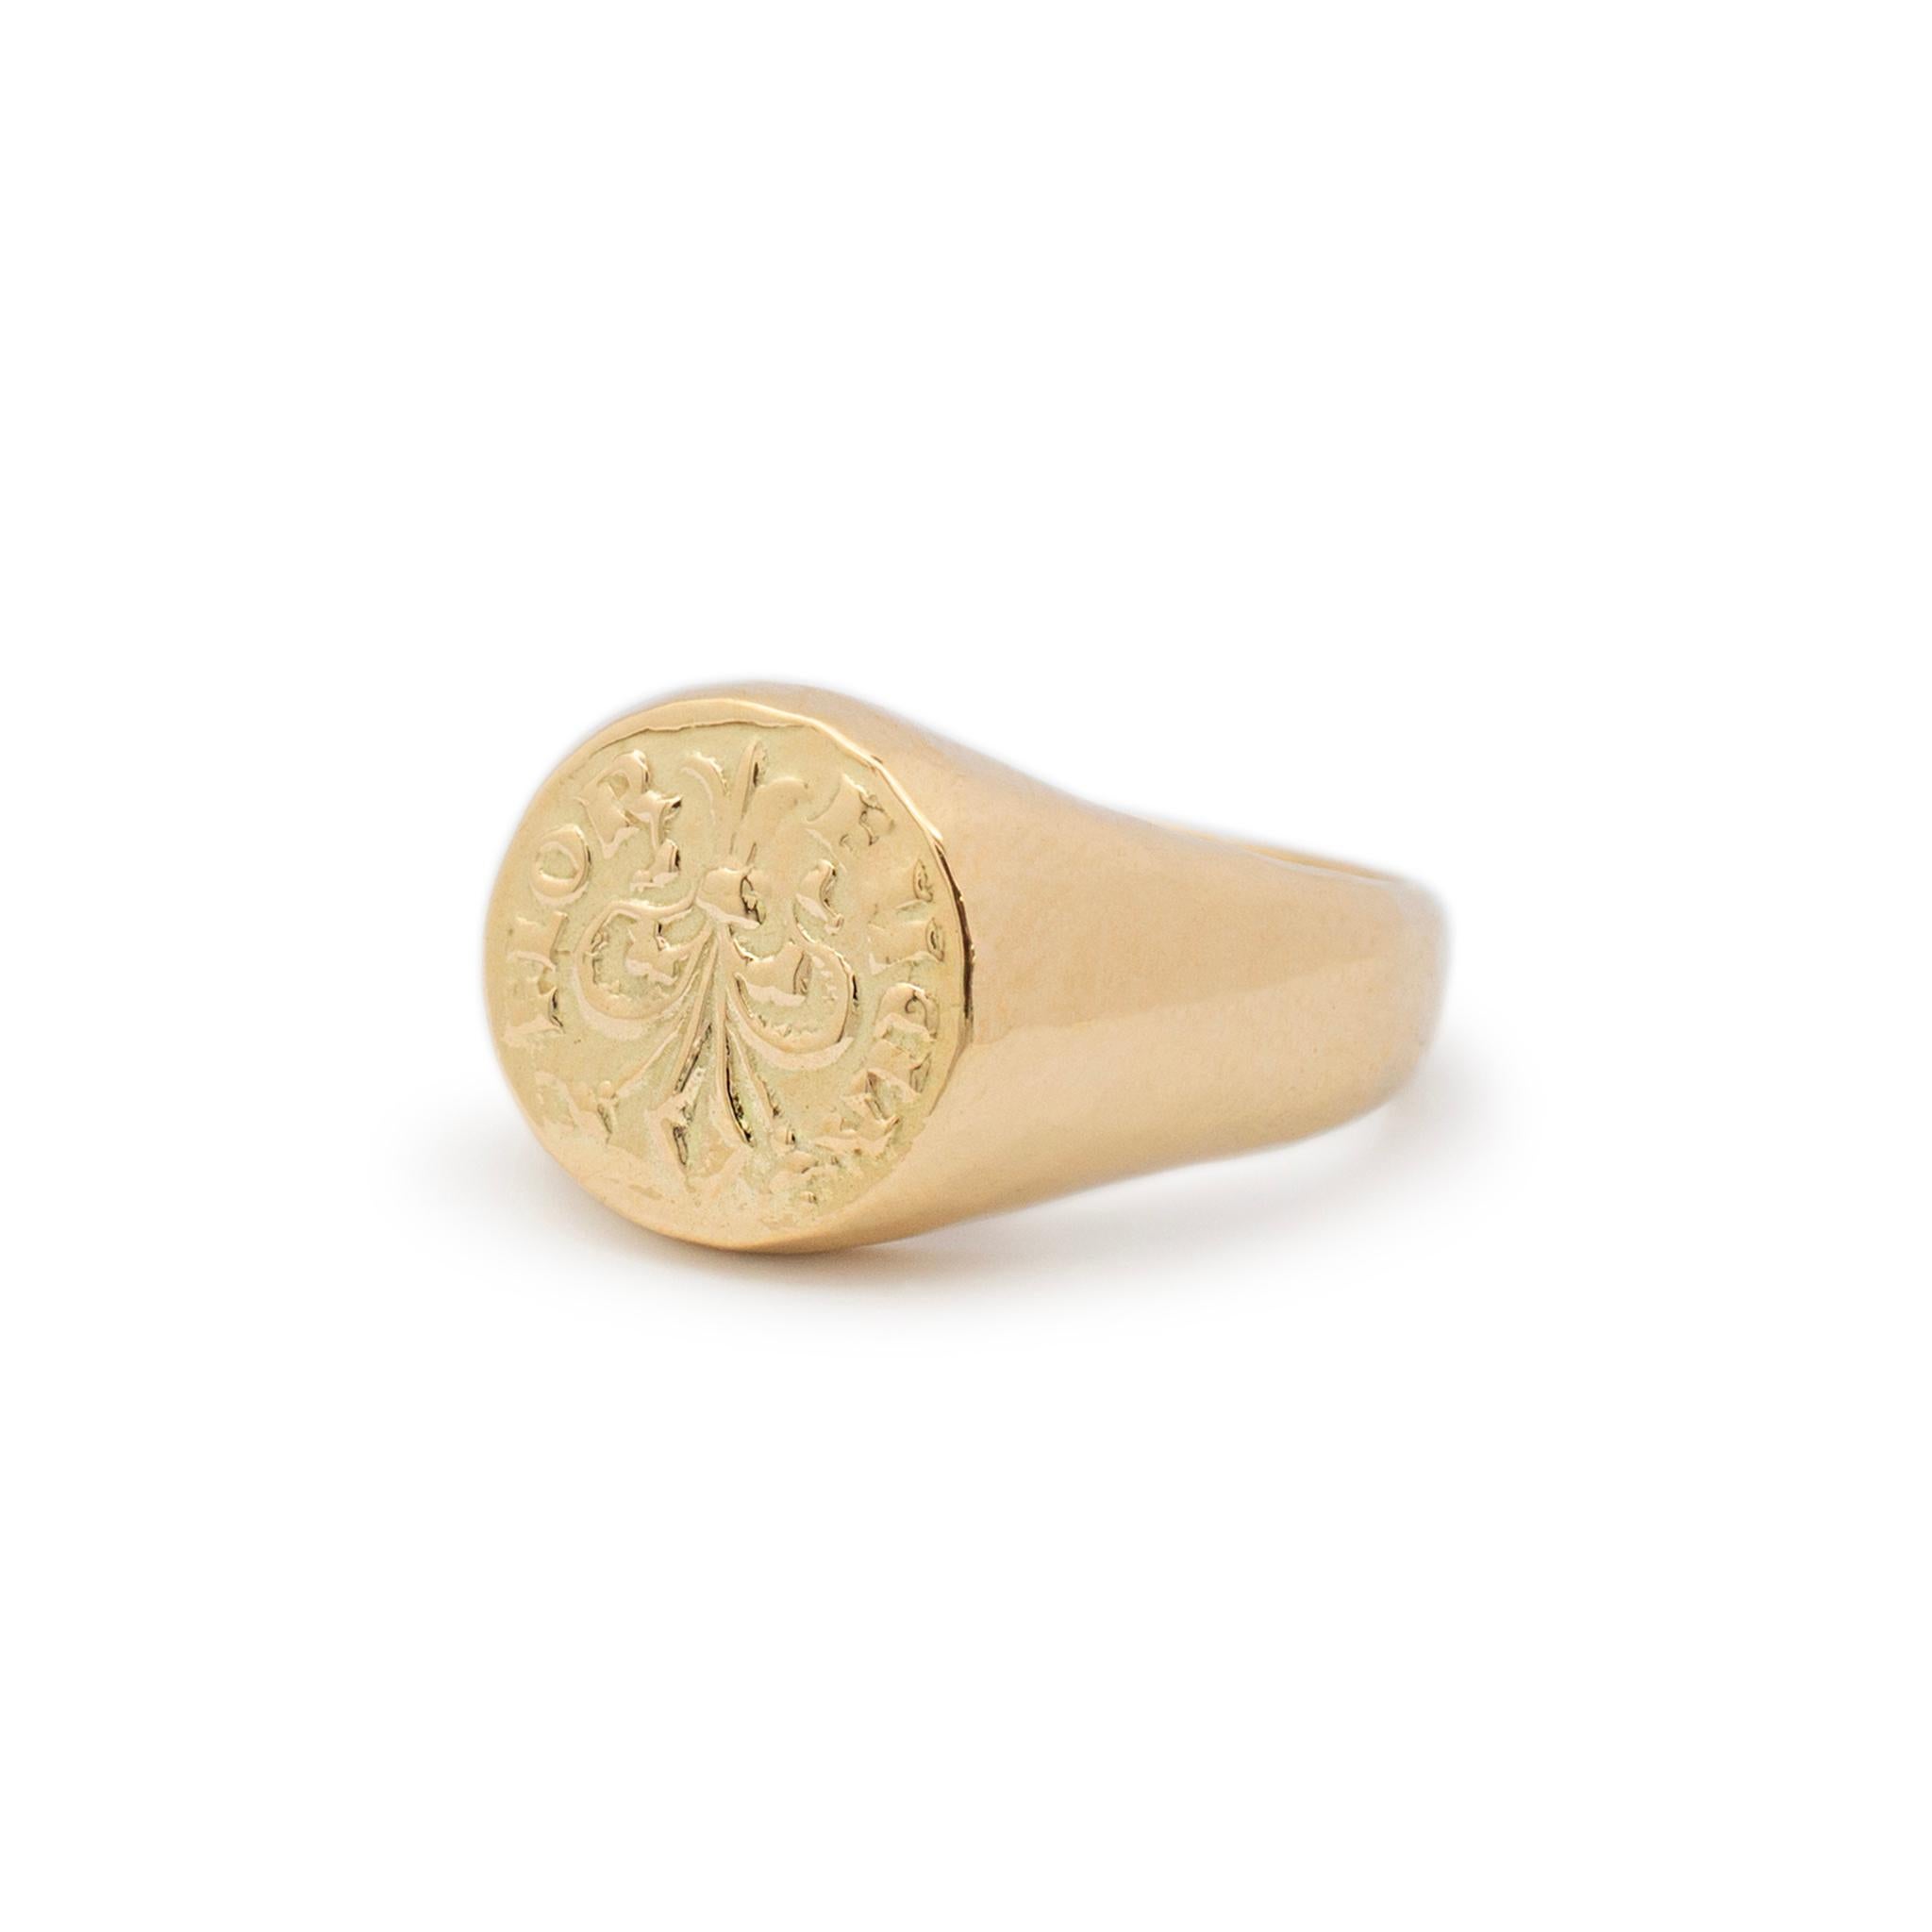 Vintage Torrini 14K Yellow Gold Fiorino Florentine Chevaglier Signet Ring In Excellent Condition For Sale In Houston, TX